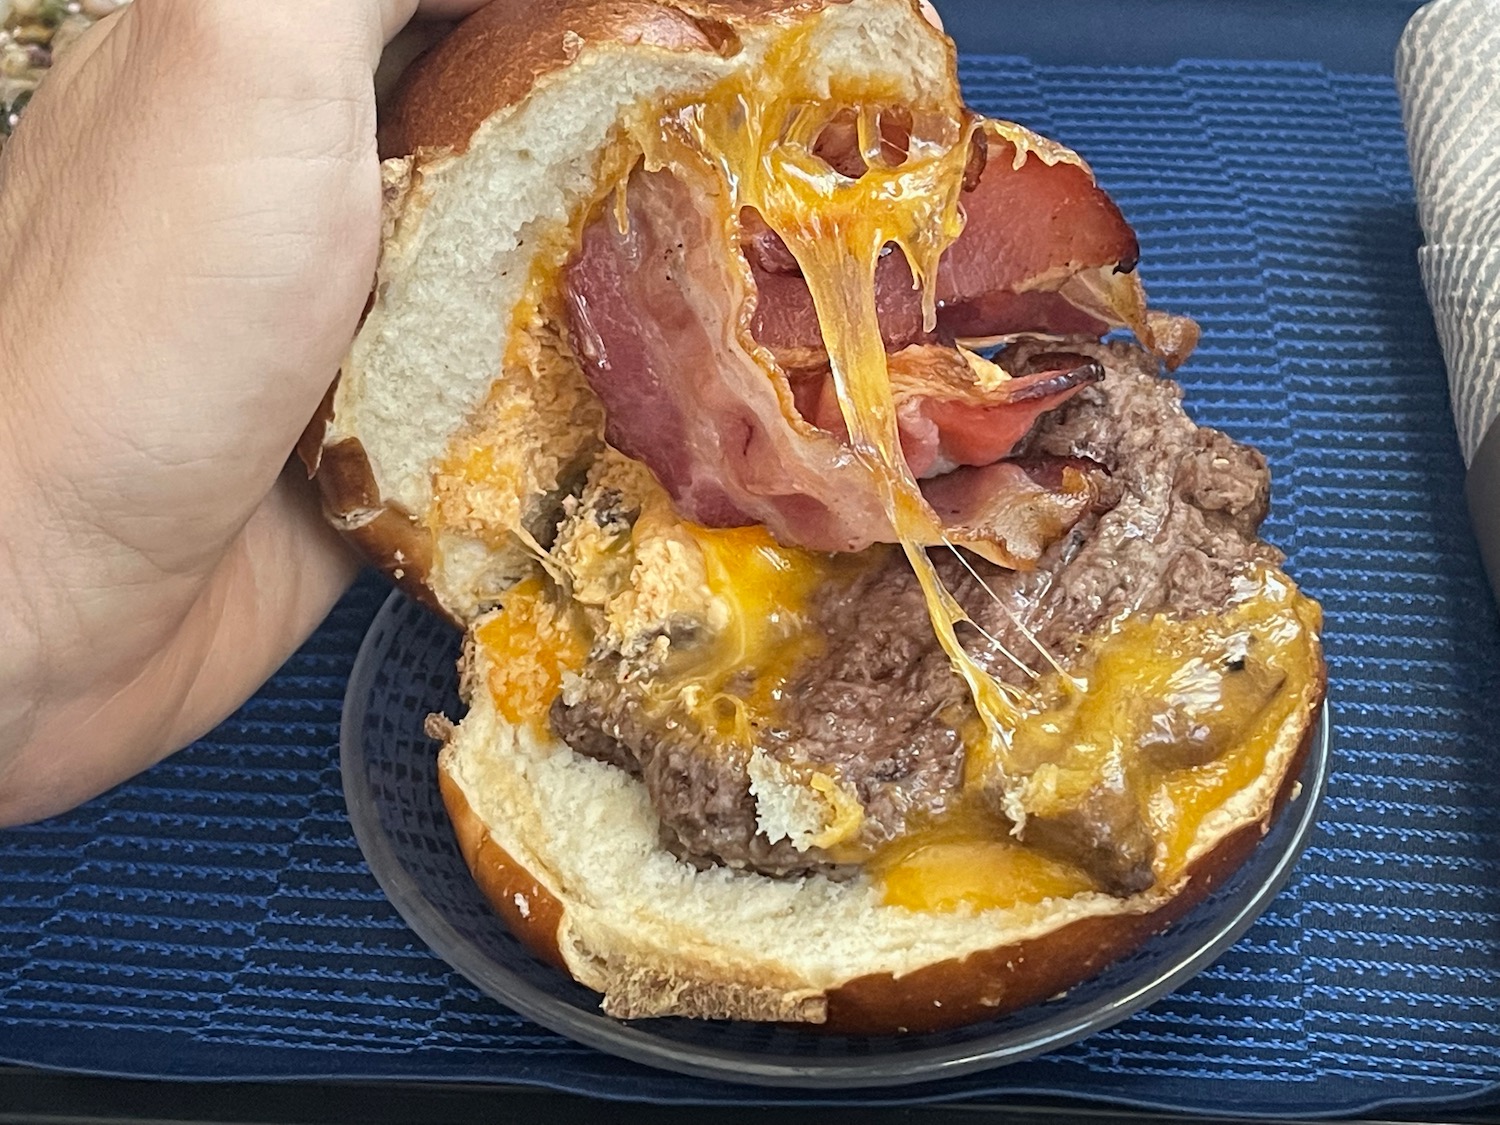 a burger with bacon and cheese on a plate